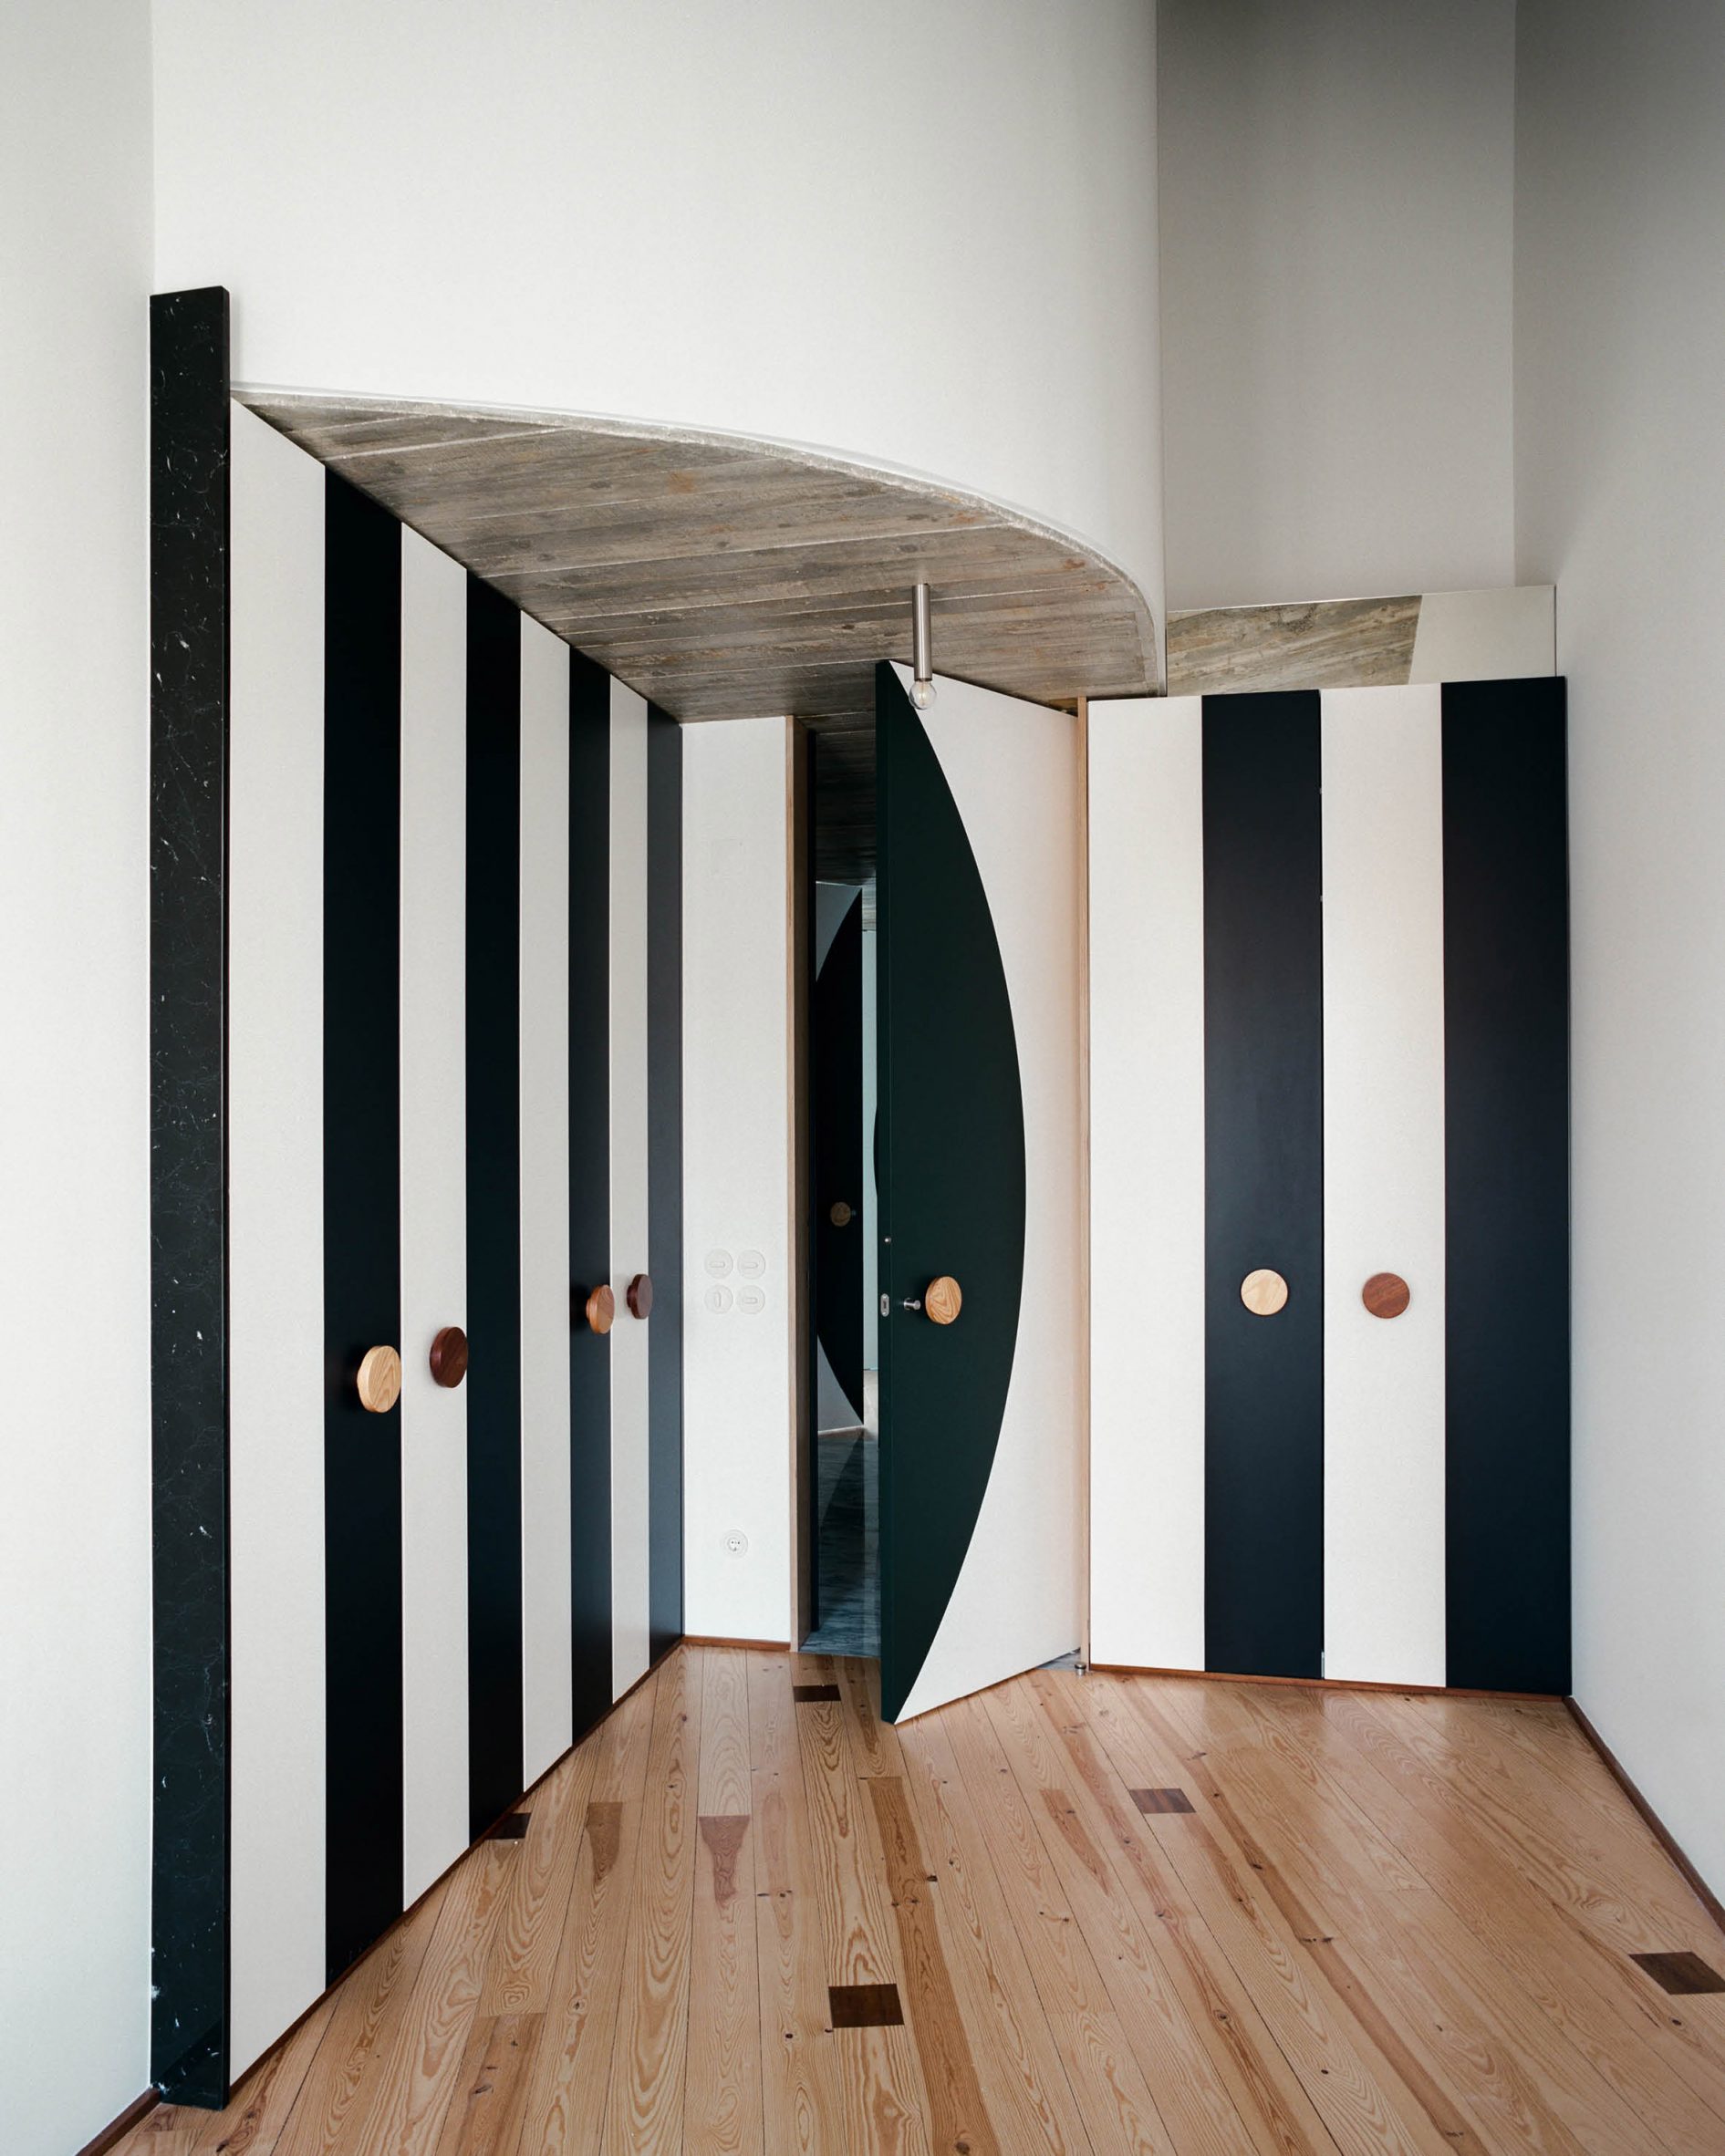 Custom striped cabinetry by Fala Atelier